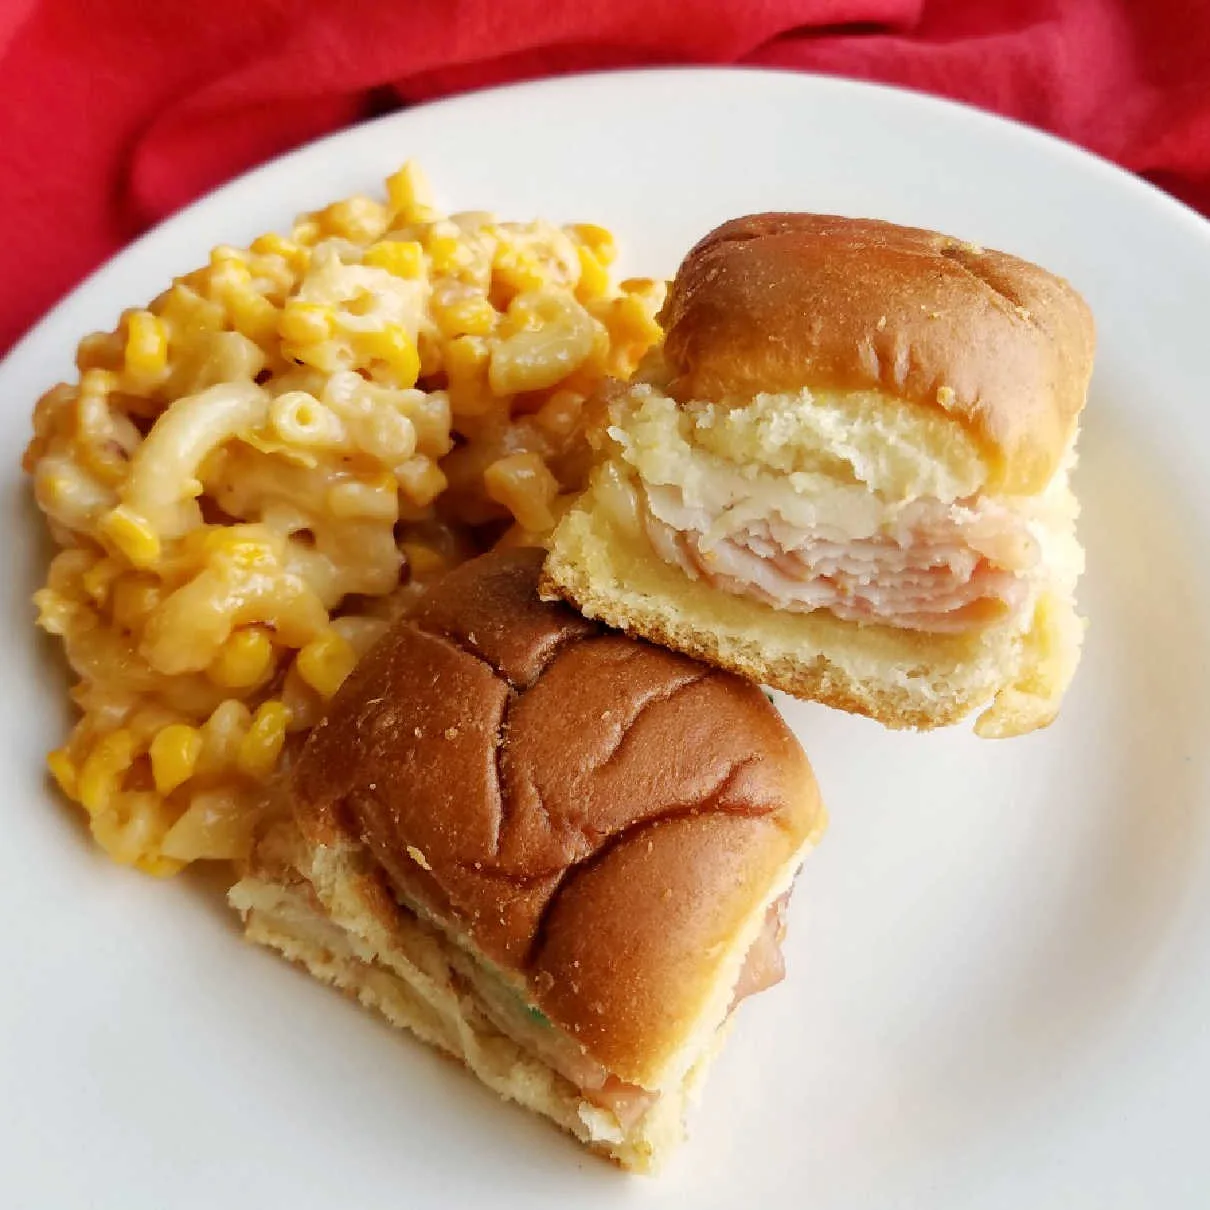 sliders on plate with macaroni and cheese and corn.